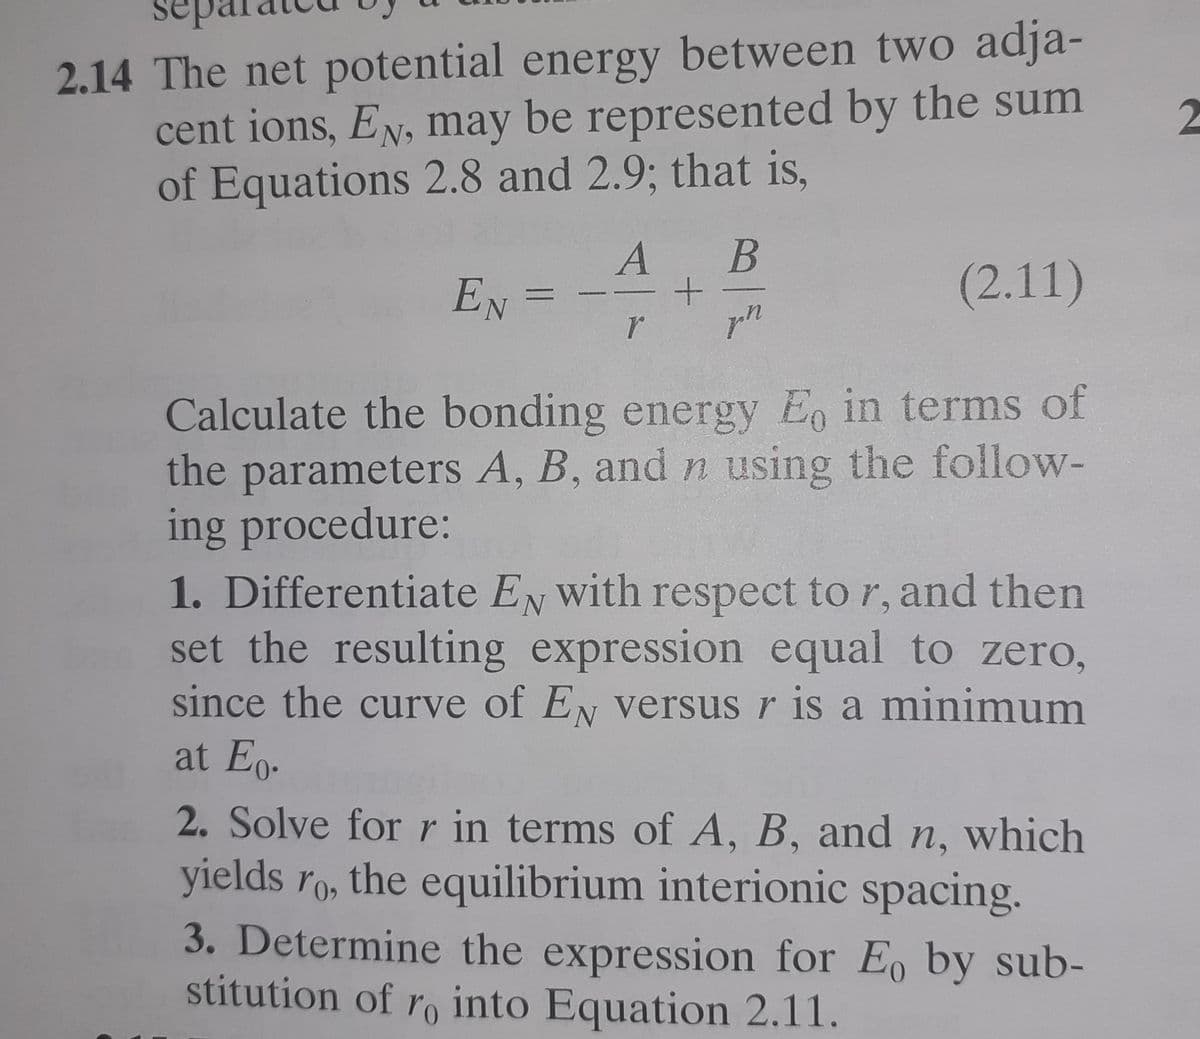 sep
2.14 The net potential energy between two adja-
cent ions, EN, may be represented by the sum
of Equations 2.8 and 2.9; that is,
В
EN
(2.11)
pn
Calculate the bonding energy Eo in terms of
the parameters A, B, and n using the follow-
ing procedure:
1. Differentiate EN with respect to r, and then
set the resulting expression equal to zero,
since the curve of EN versus r is a minimum
at Eo.
2. Solve for r in terms of A, B, and n, which
yields ro, the equilibrium interionic spacing.
3. Determine the expression for E, by sub-
stitution of ro into Equation 2.11.
